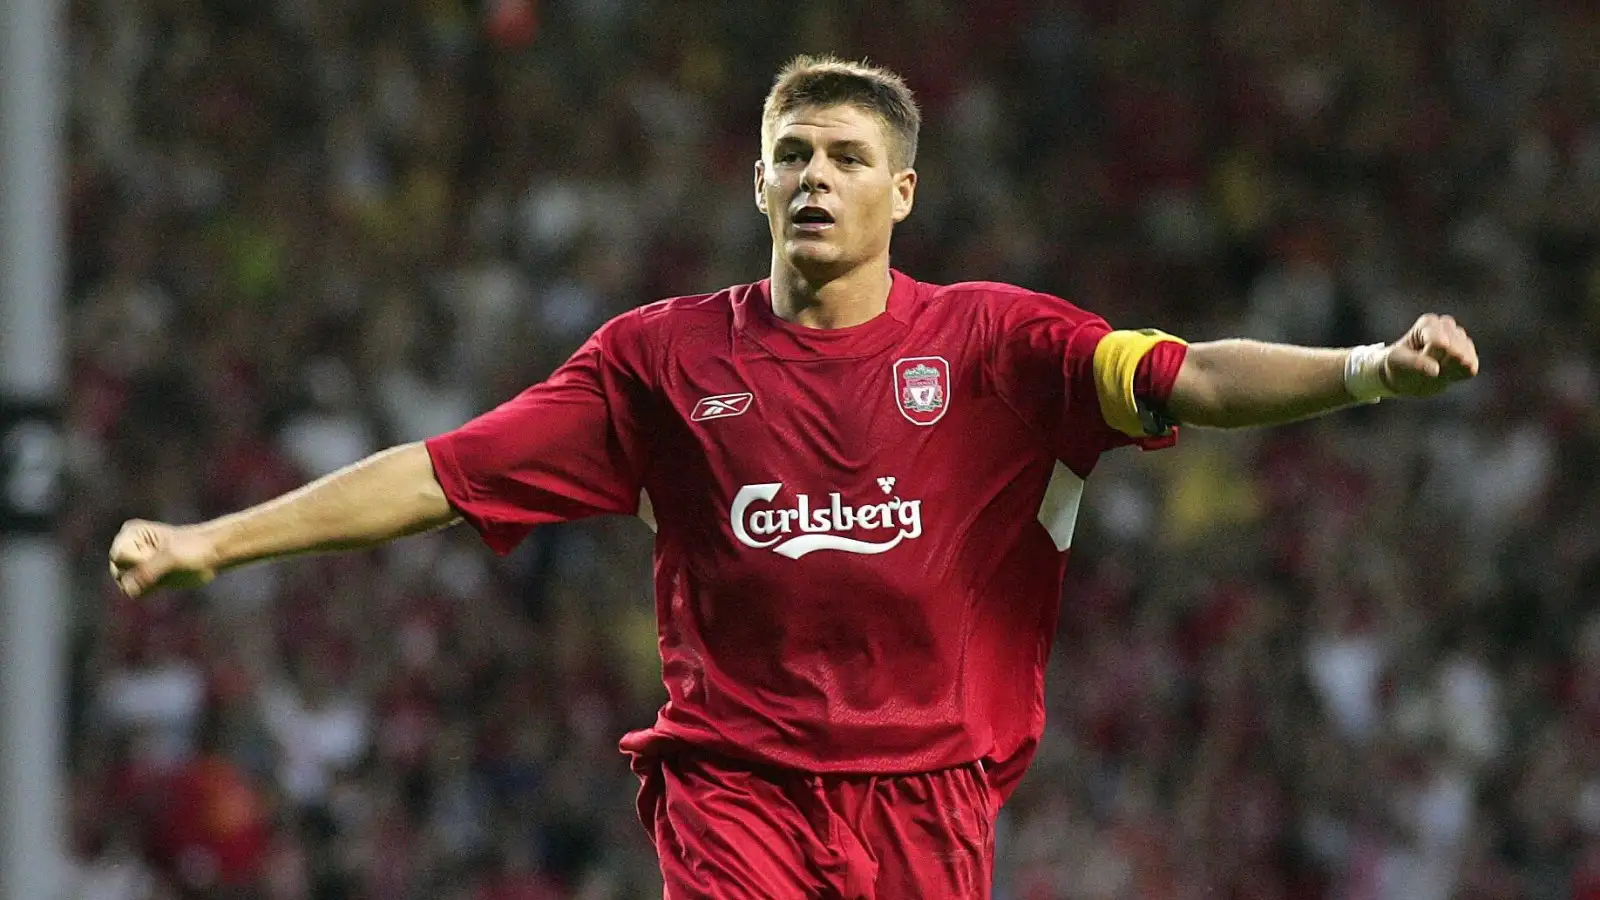 Liverpool’s unlikely CL title defence at TNS & a prime Steven Gerrard hat-trick